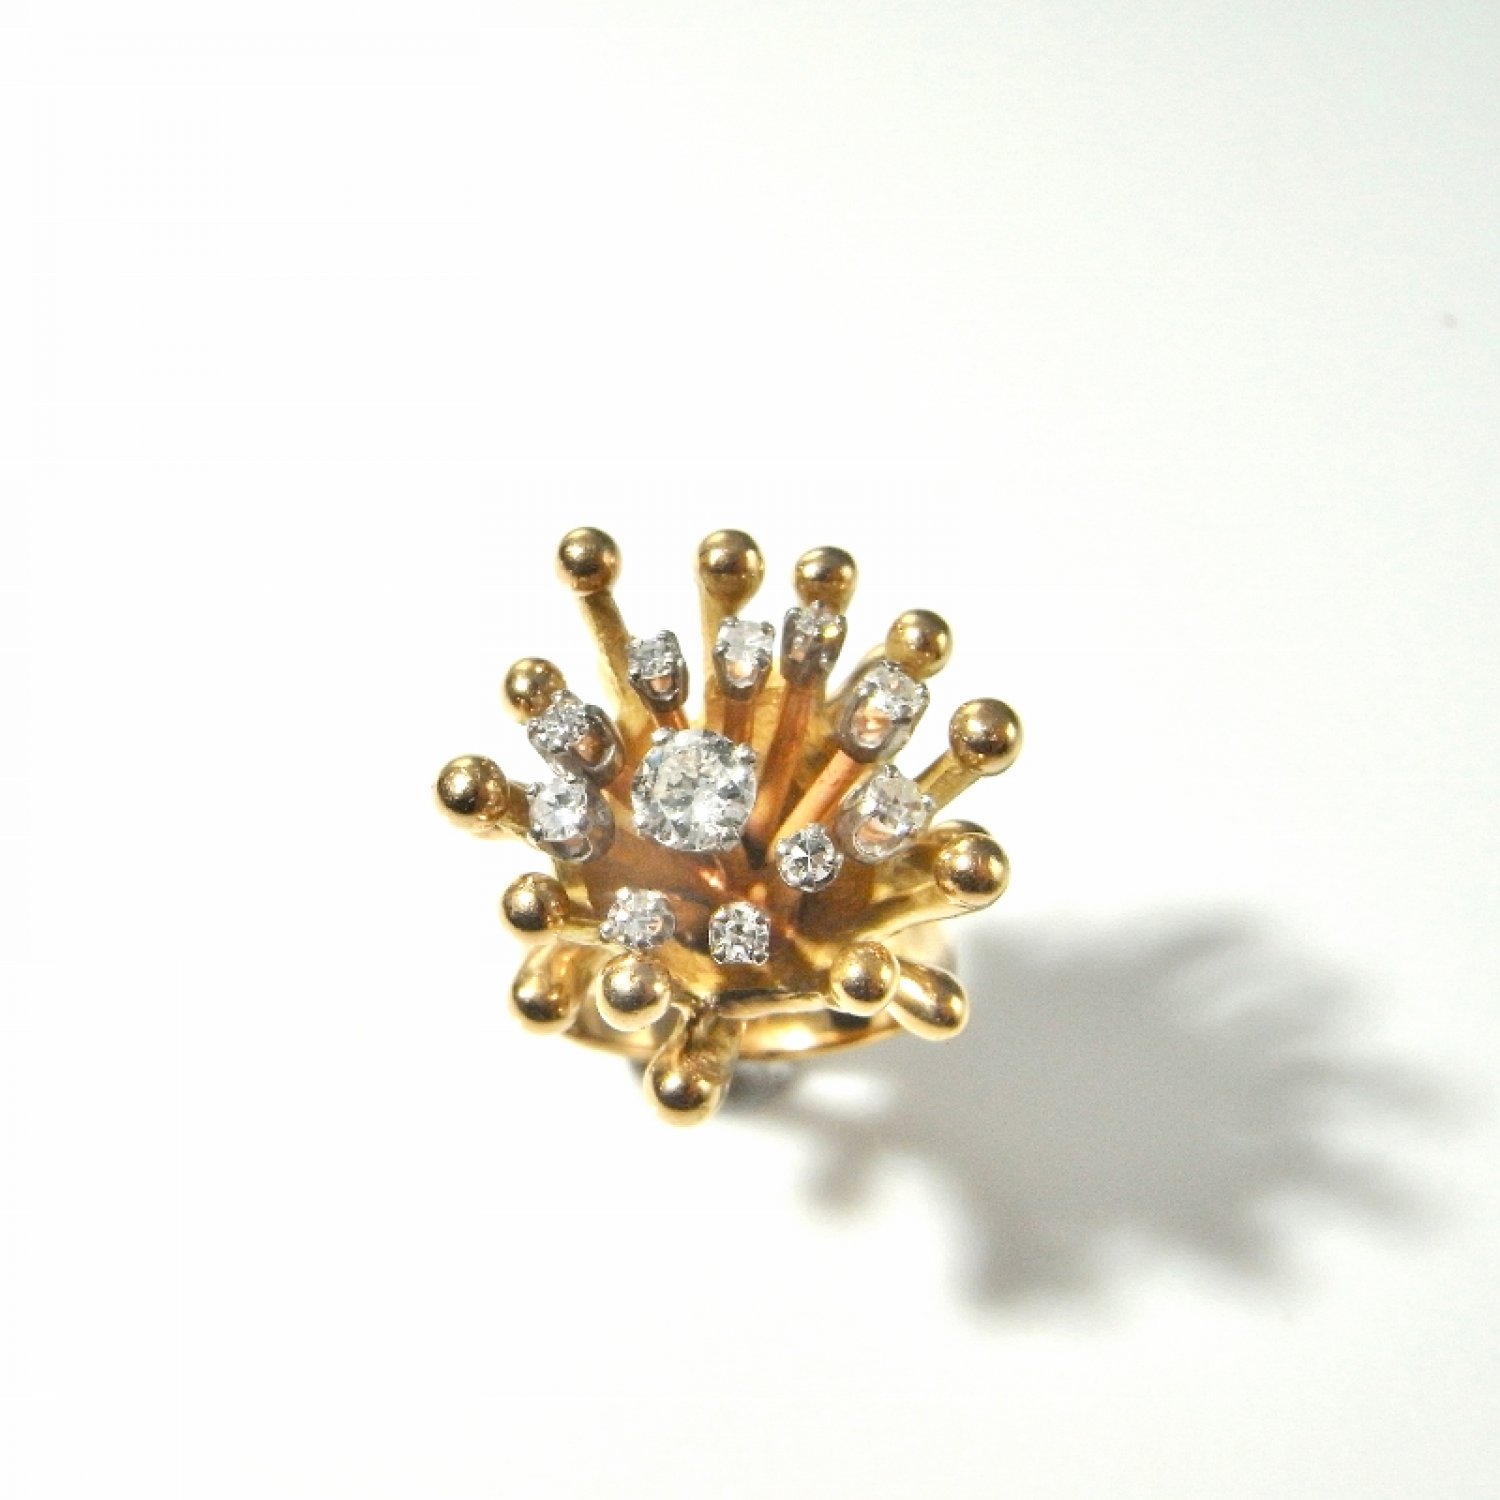 Starburst Diamond 14K Gold Ring Unique Engagement Ring One of a Kind Wedding Ring Anniversary Ring Dress ring Cocktail Ring Designer Ring Mid Century Modernist 1950s 1960s 1970s handmade Unique Statement Ring Sculptural Rare Sparkly Modern Atomic